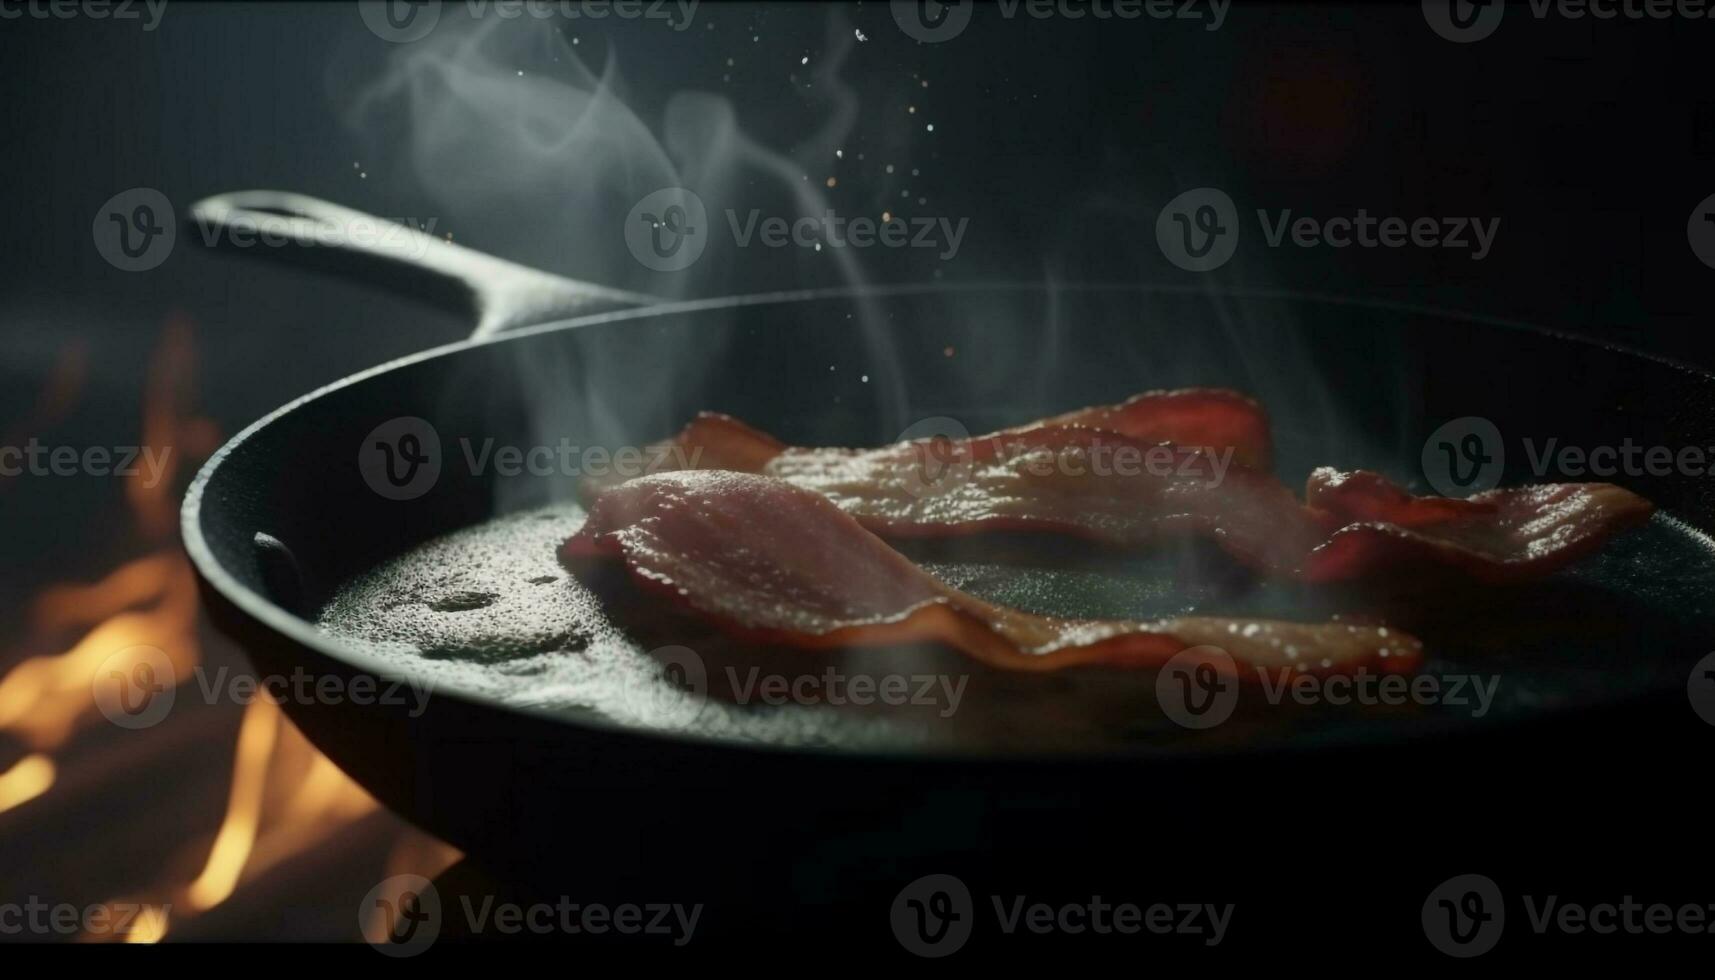 Grilled pork steak with bacon and vegetable sauce, cooked perfectly generated by AI photo